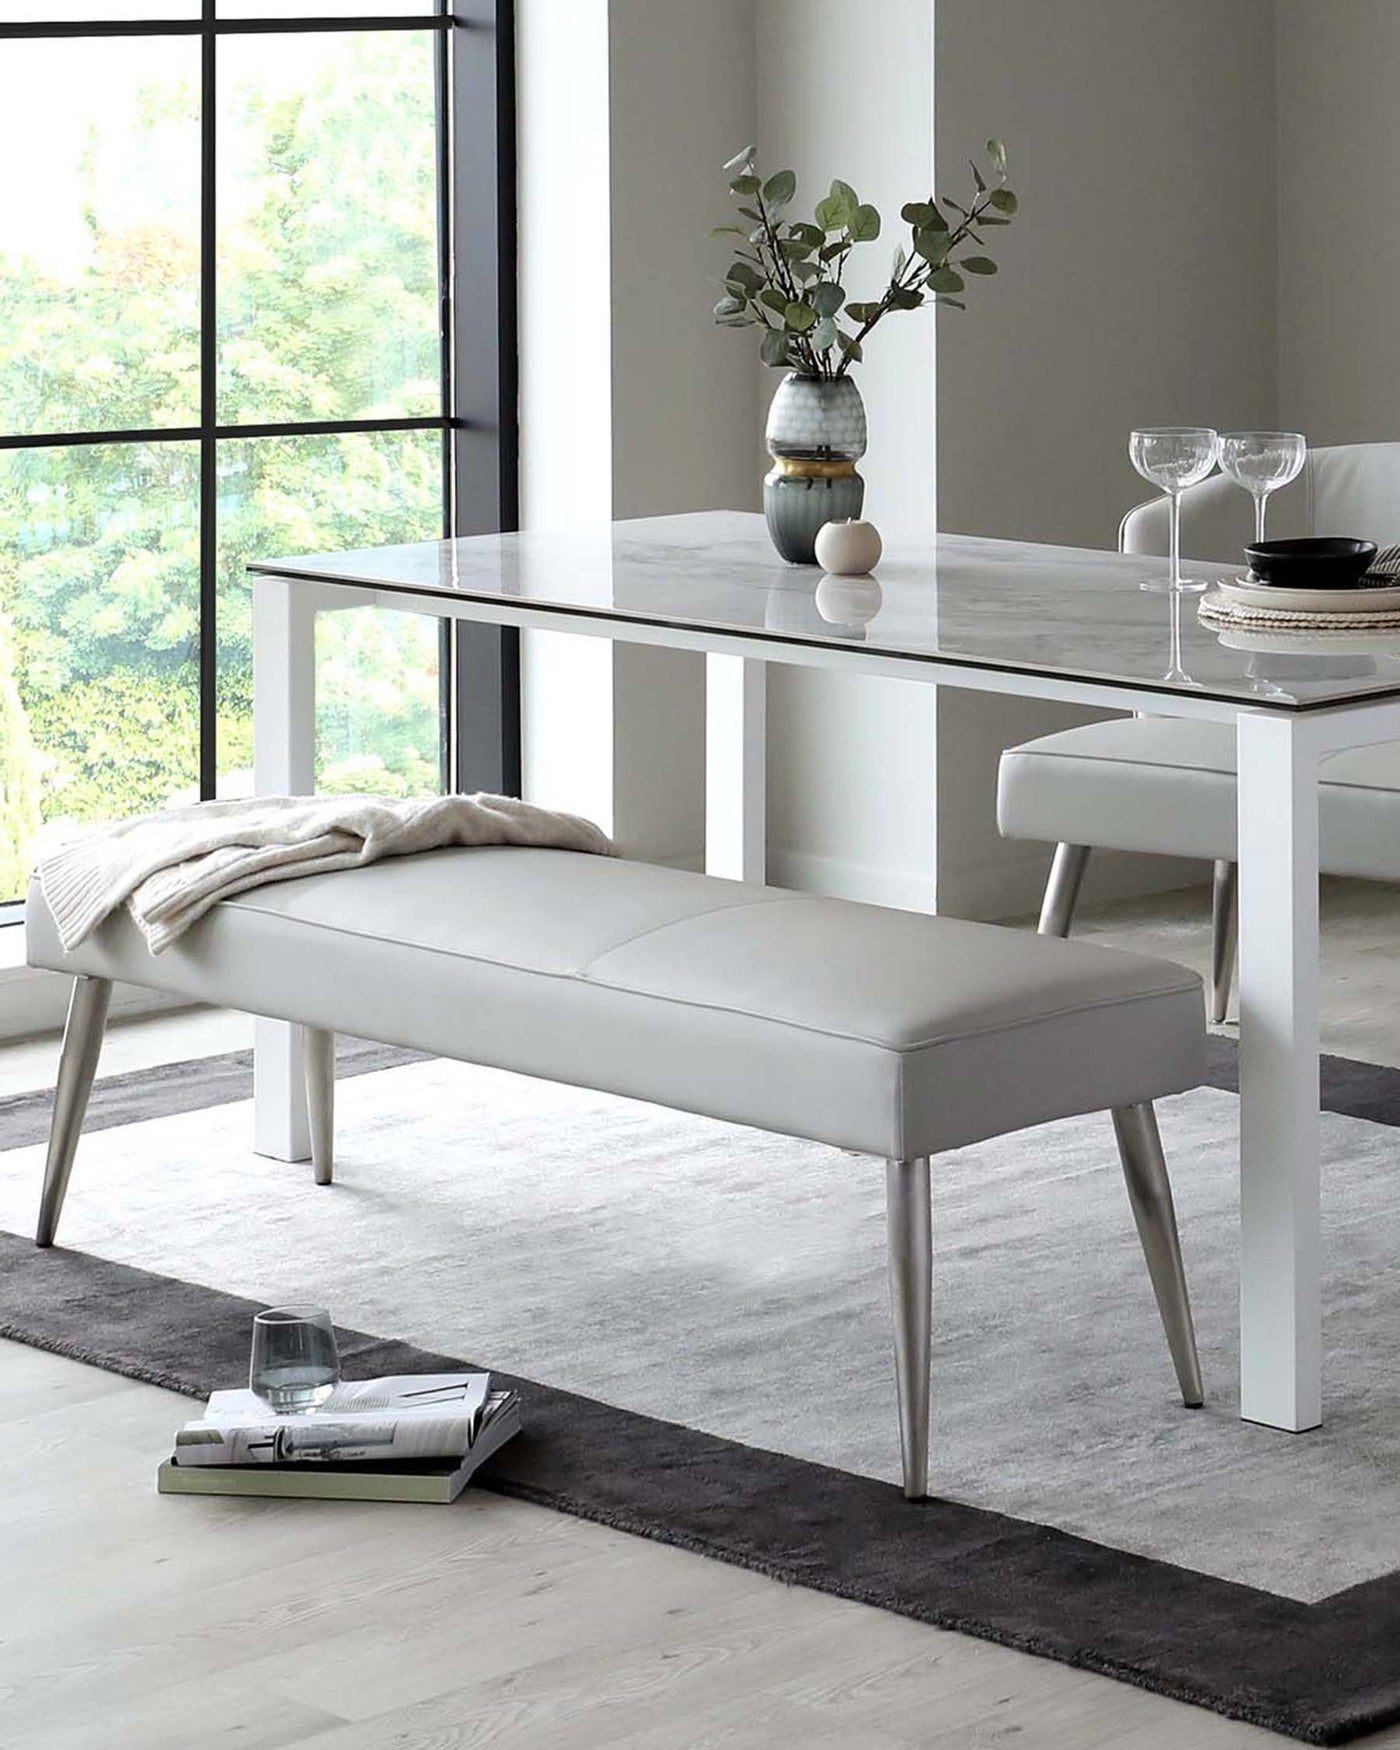 Mellow Light Grey Faux Leather And Stainless Steel 3 Seater Without Backrest Dining Bench